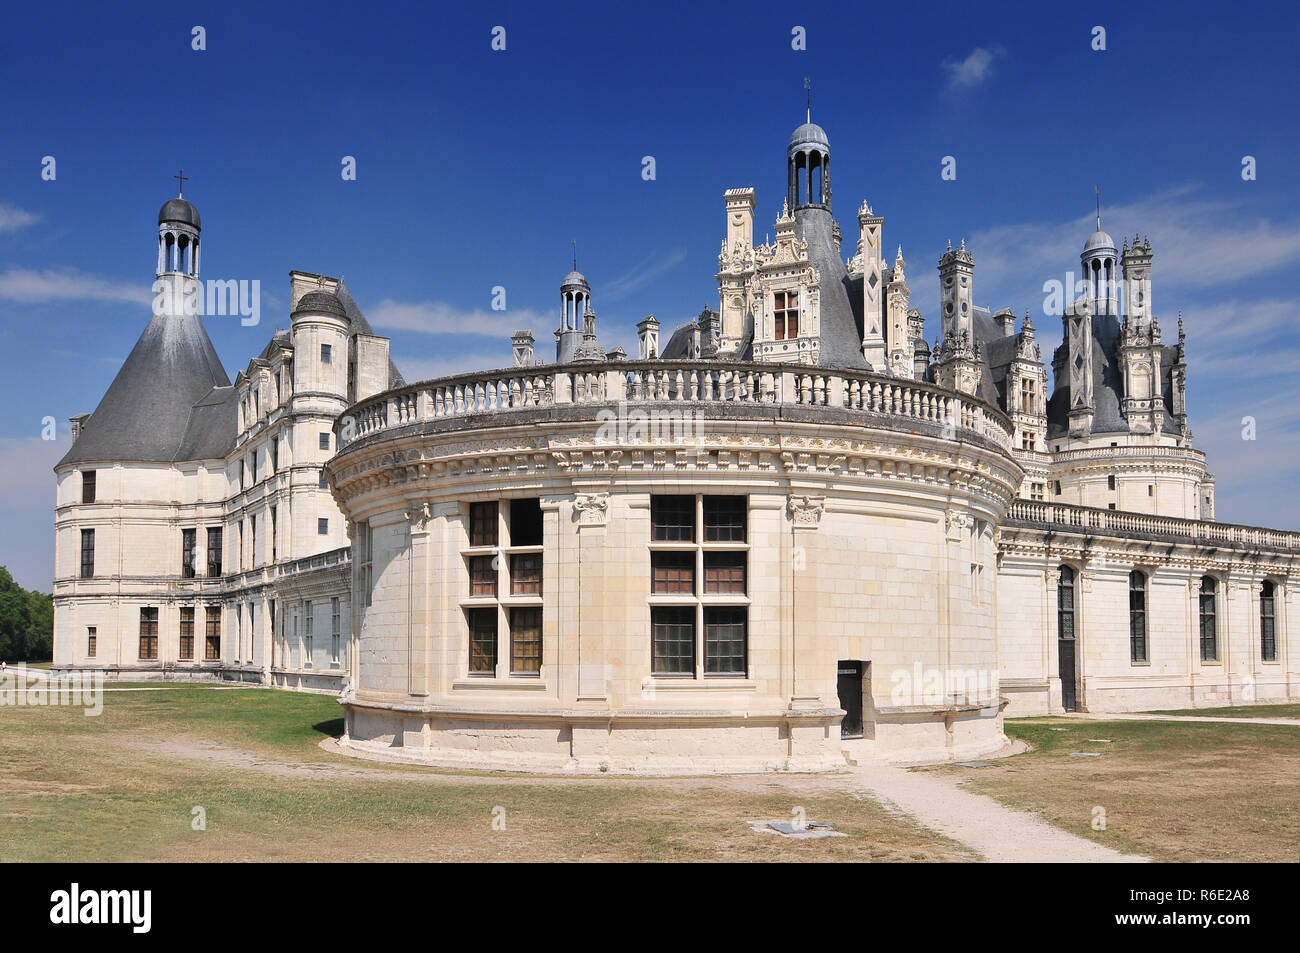 Chateau De Chambord Royal Medieval French Castle Loire Valley France Europe Unesco Heritage Site Stock Photo